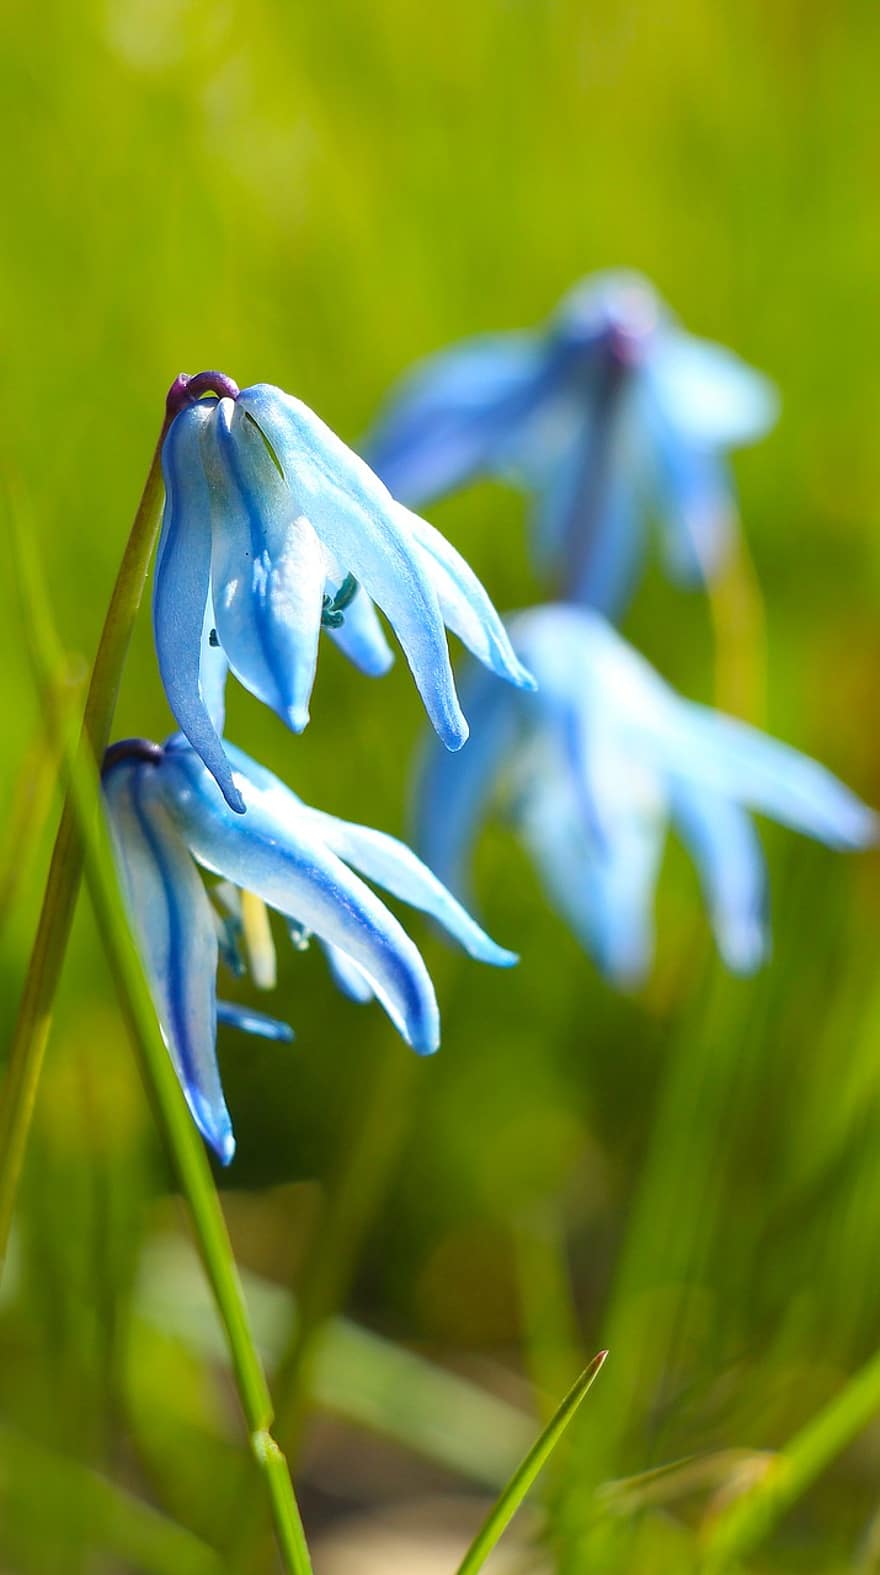 Flowers, Siberian Squill, Blue Flowers, Garden, Nature, close-up, plant, green color, flower, summer, leaf